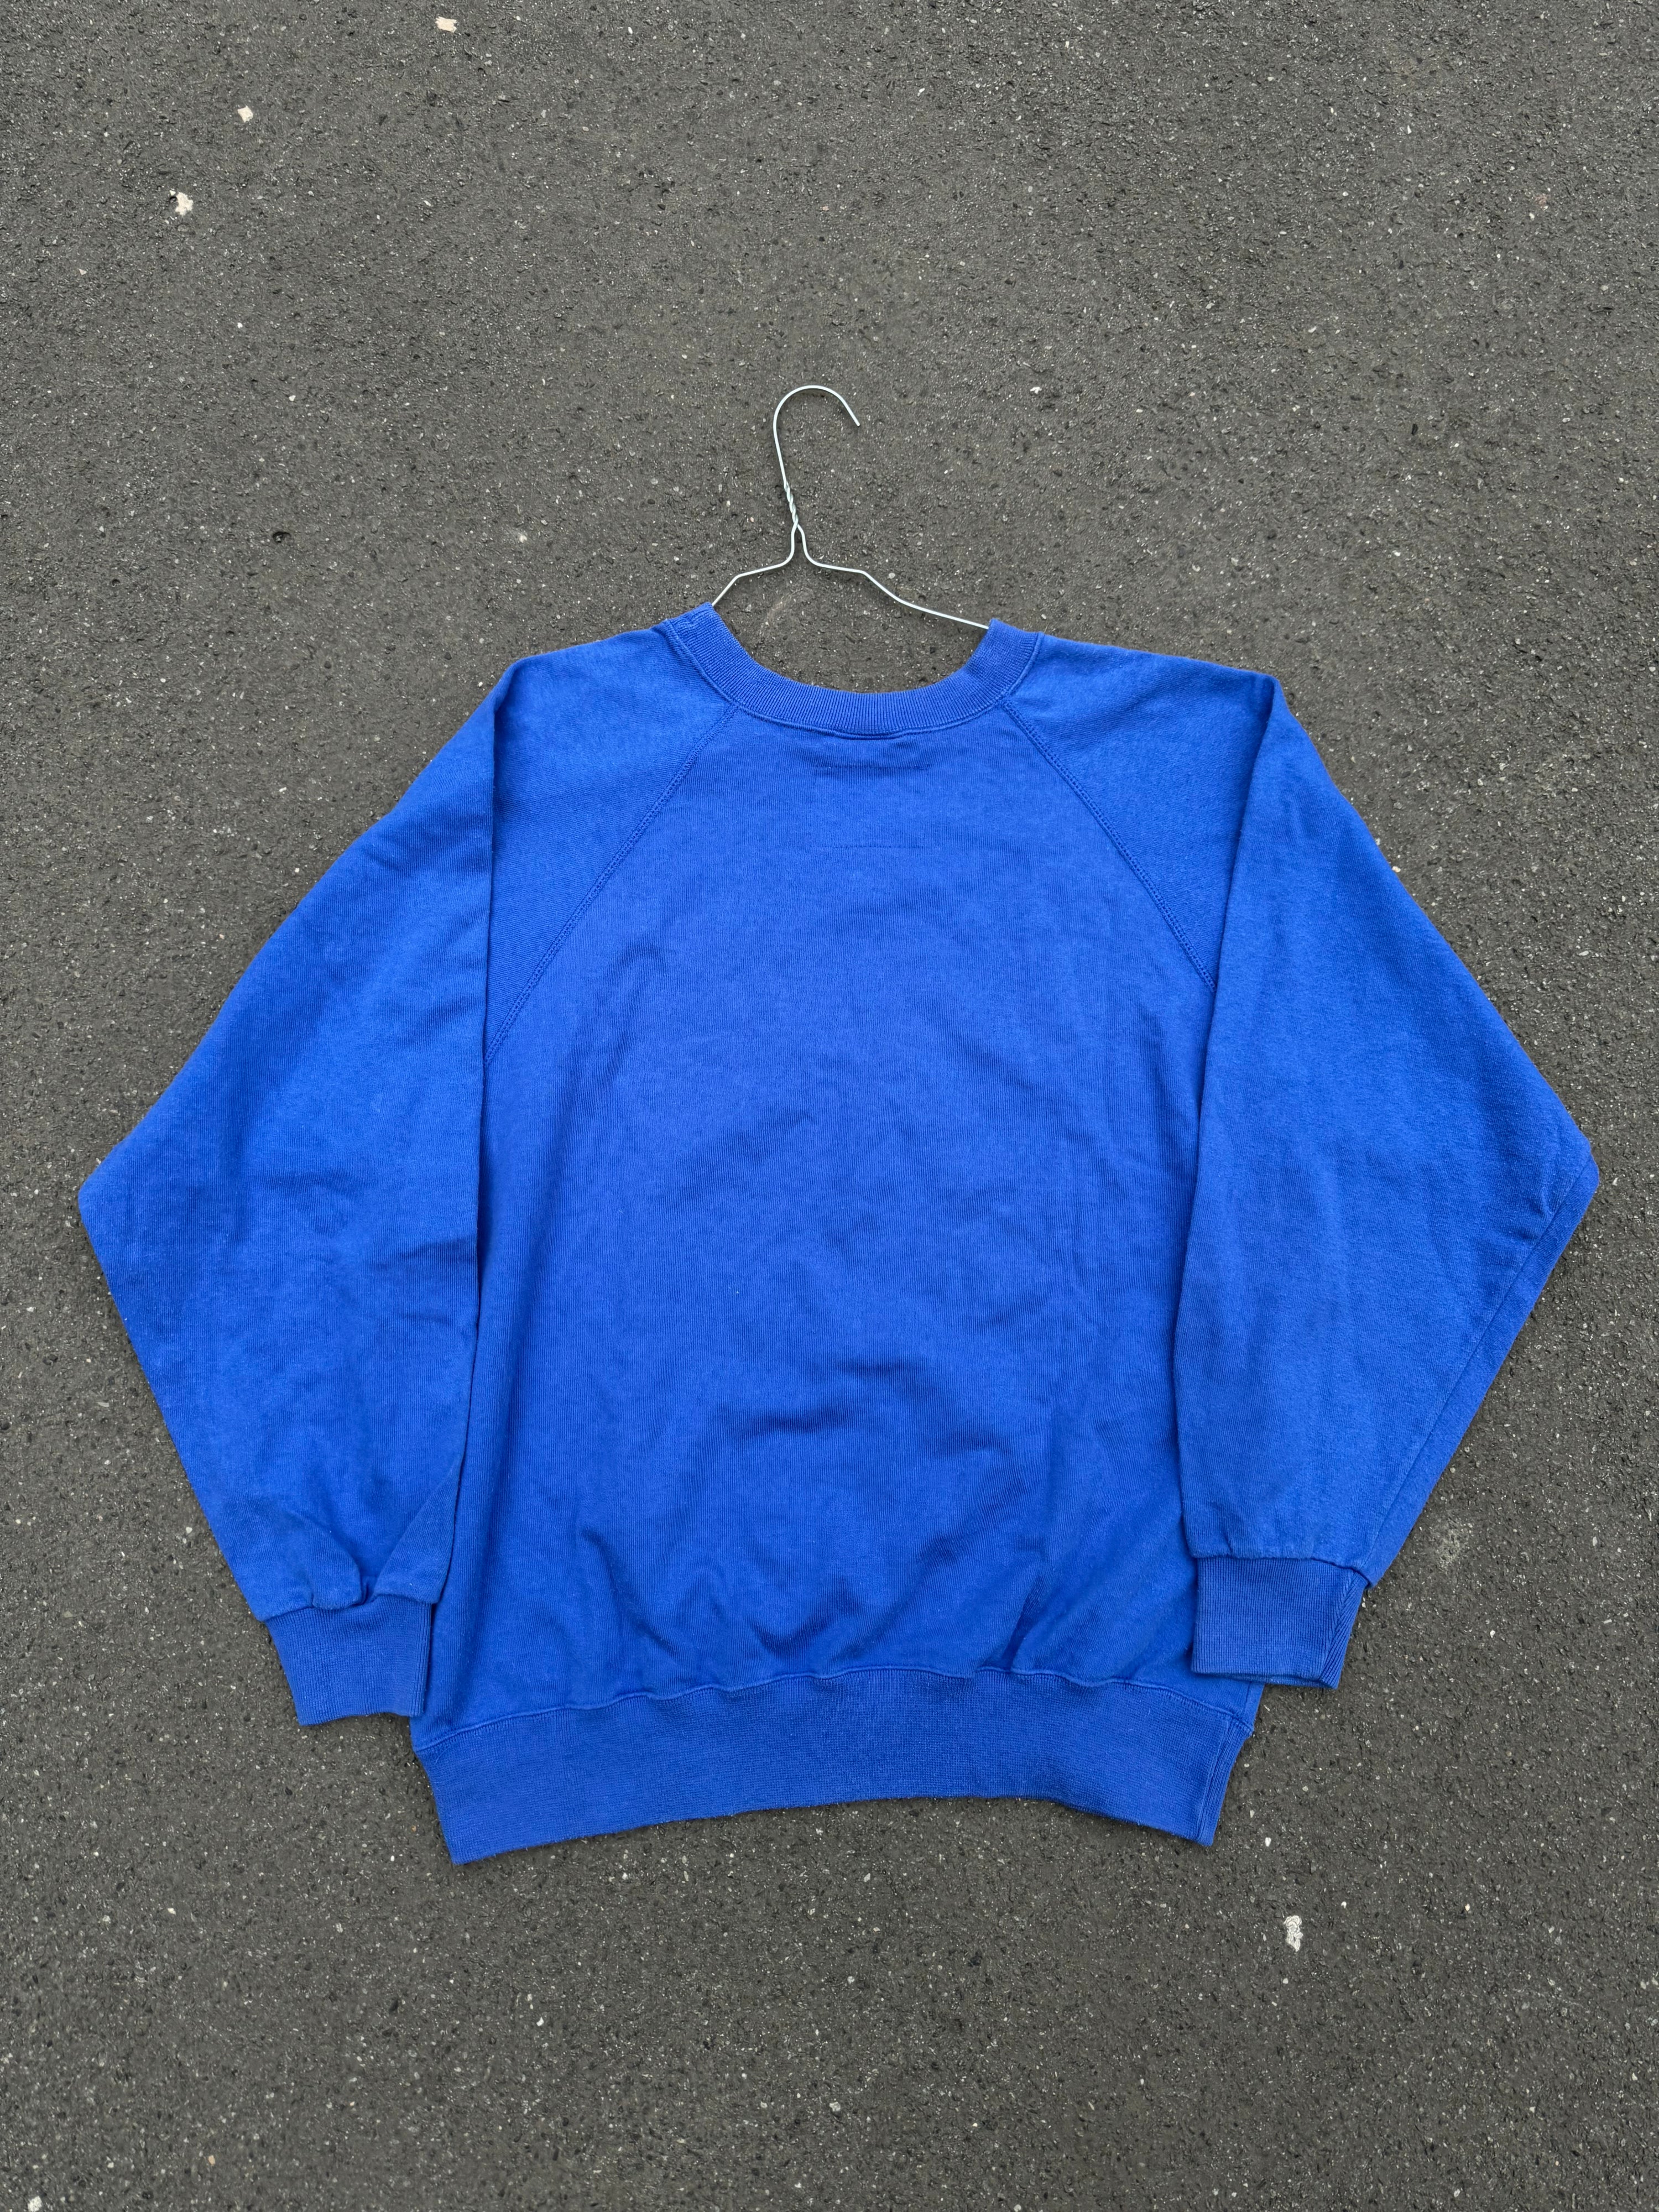 Vintage Champion Logo Made in the USA Sweater (M)